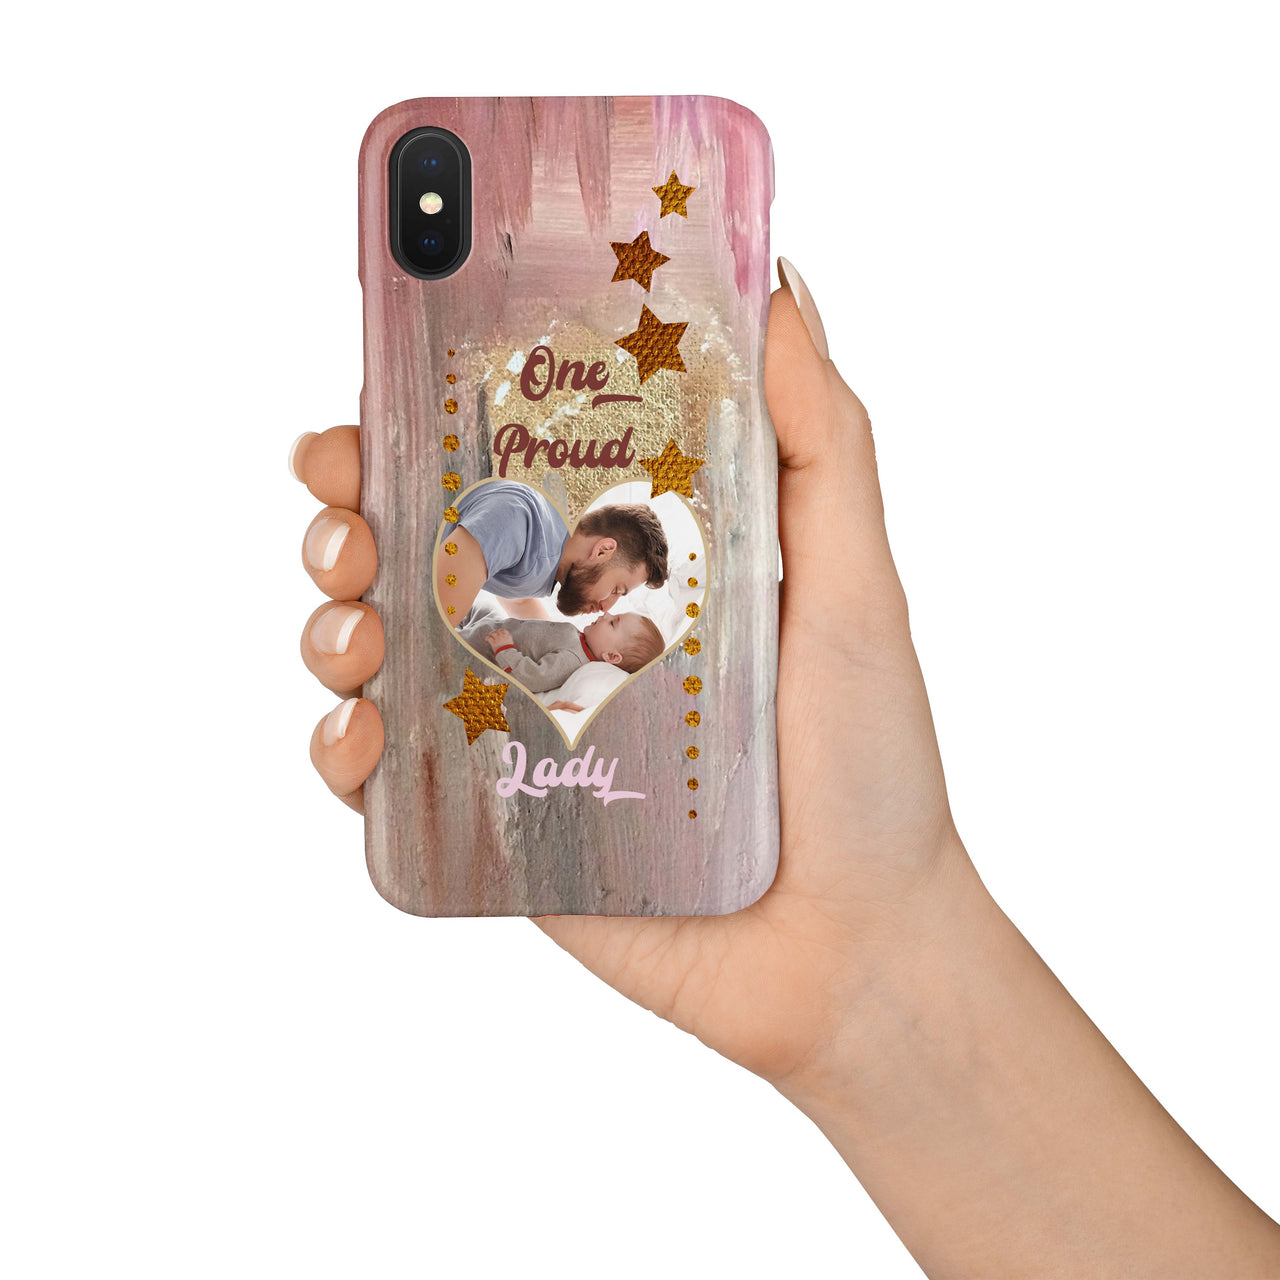 One Proud Lady iPhone Case Personalize with Photo and Any Name